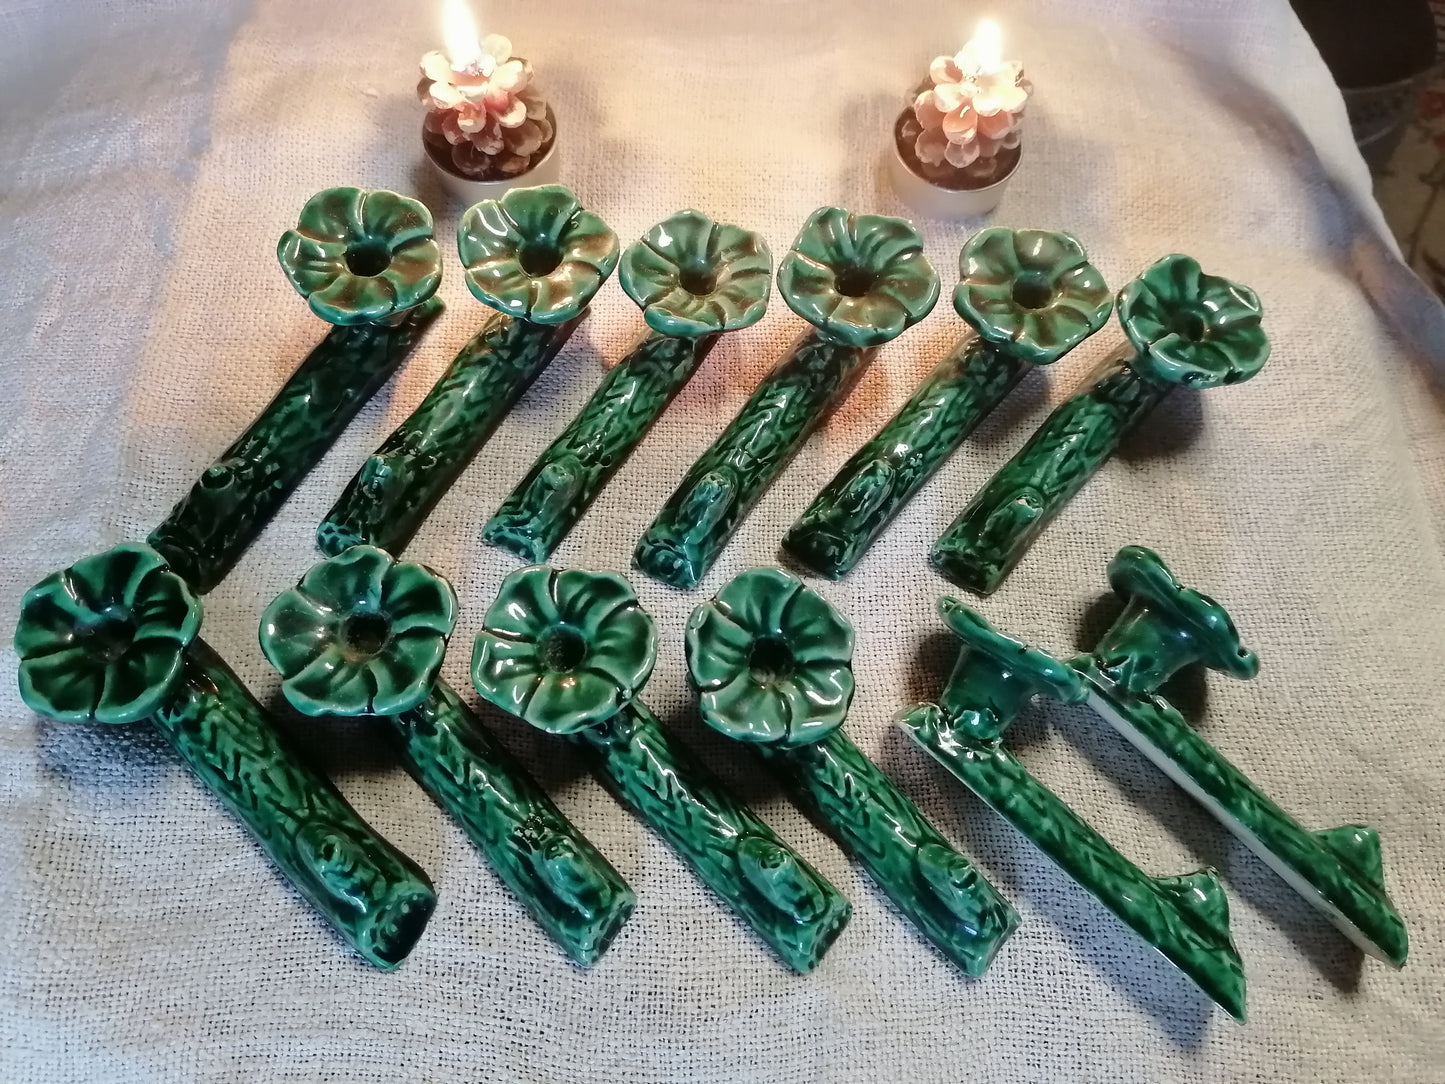 French green majolica knife rests (12)French green majolica knife rests (12)